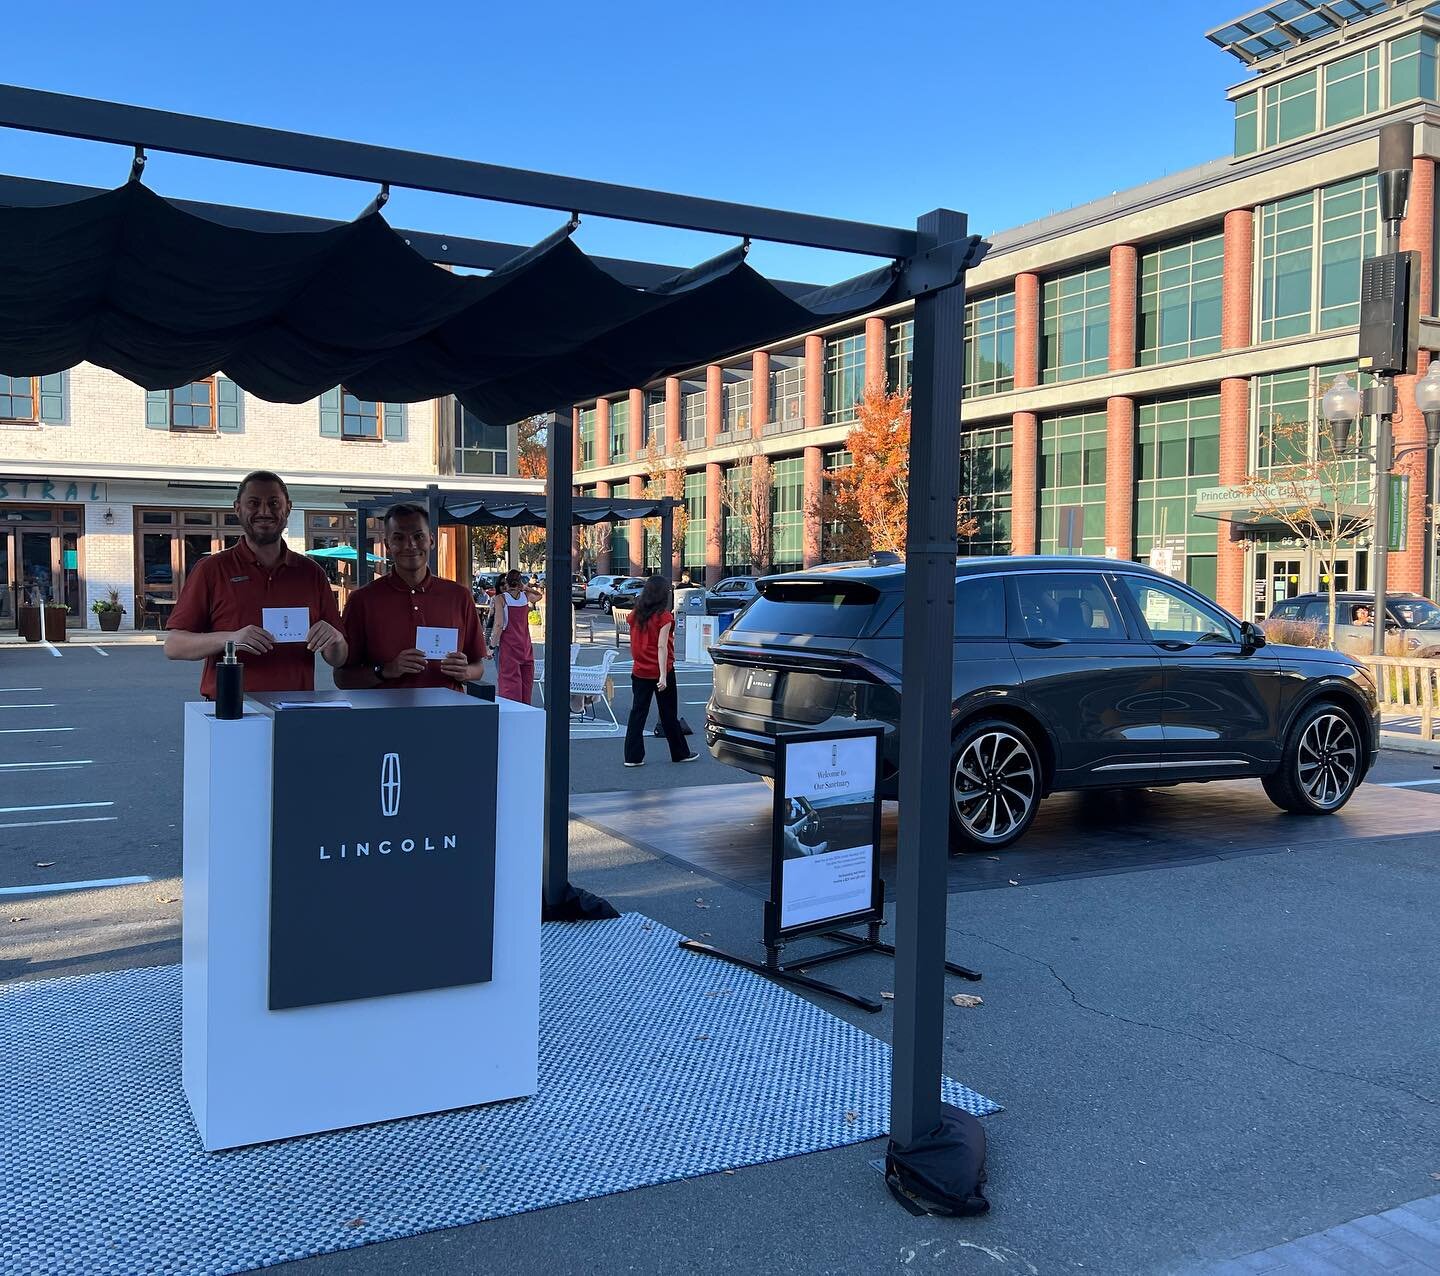 Test-drive with @lincoln , see the 2024 Lincoln Nautilus and collect your $25 @bluemercury gift card! We&rsquo;re live in Princeton, NJ 10/28 and 10/29 from 10 am - 6 pm.  Corner of Hulfish and Witherspoon streets with @palmersquare . 

Bring a frien